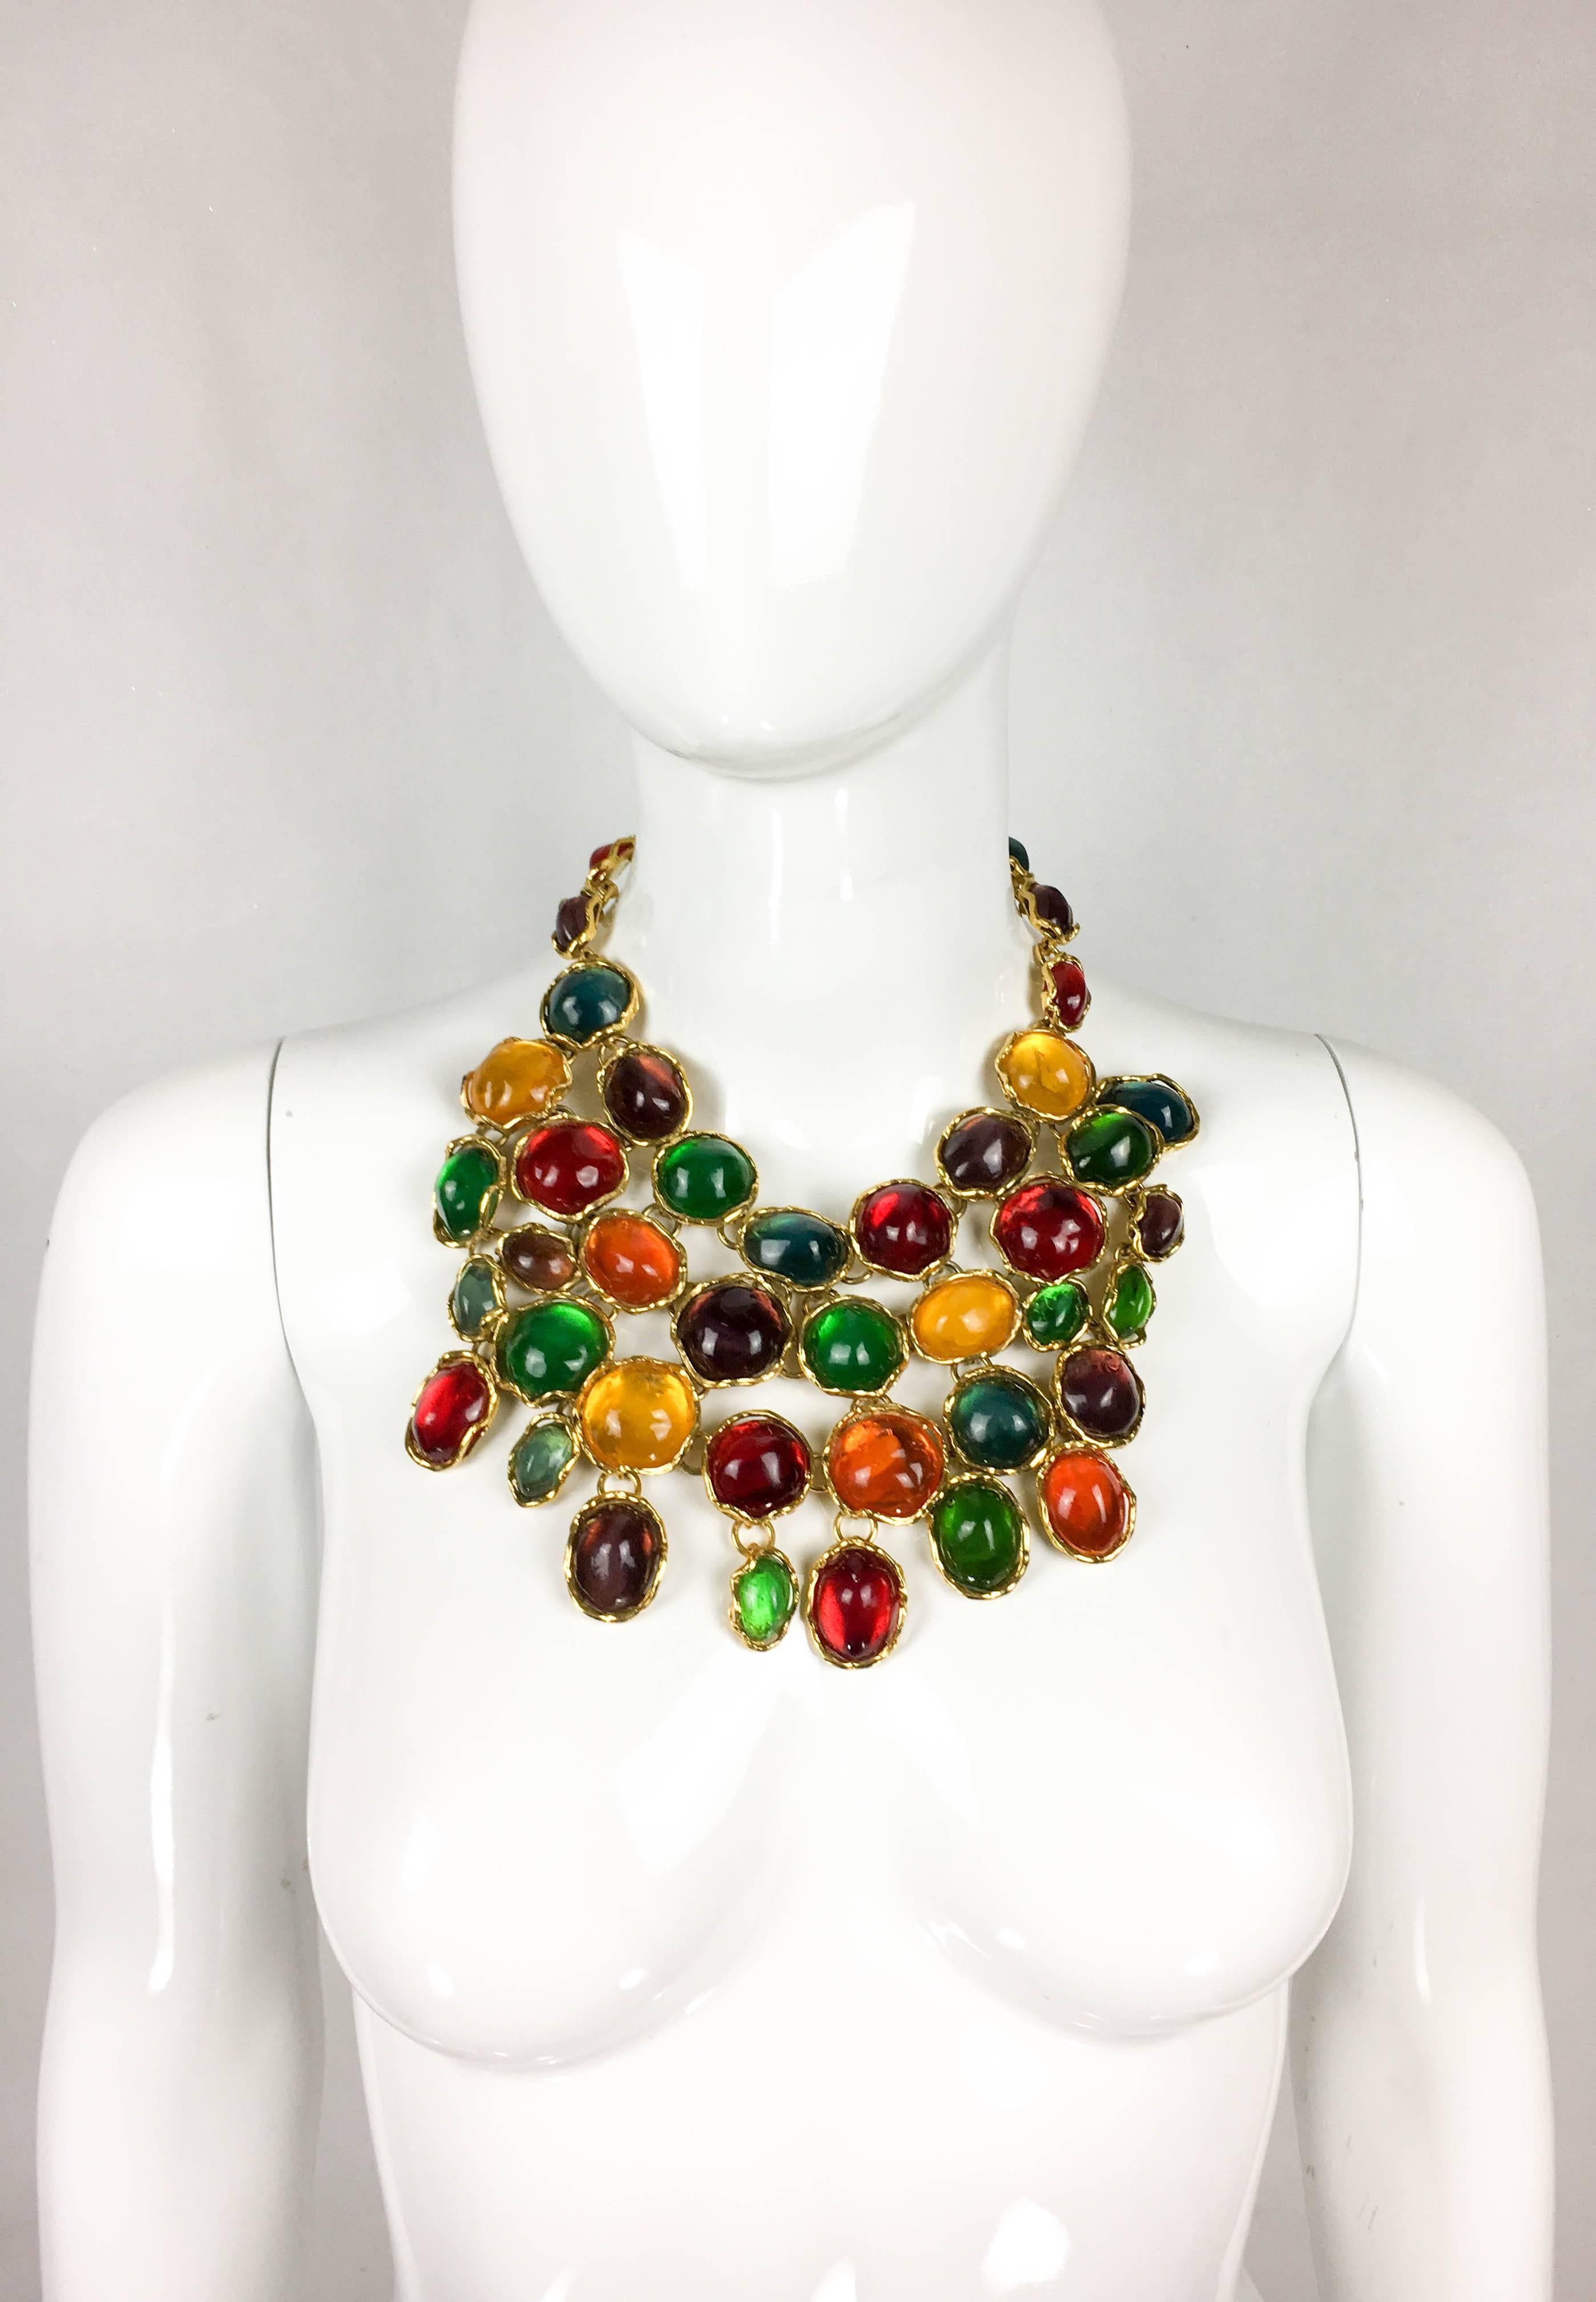 Vintage Yves Saint Laurent Colourful Resin Bib Necklace. This amazing piece by Yves Saint Laurent dates back from 1990. Set in gilt metal are irregular resin gems in various sizes and colours creating a dramatic bib. S-Hook closure on the back.